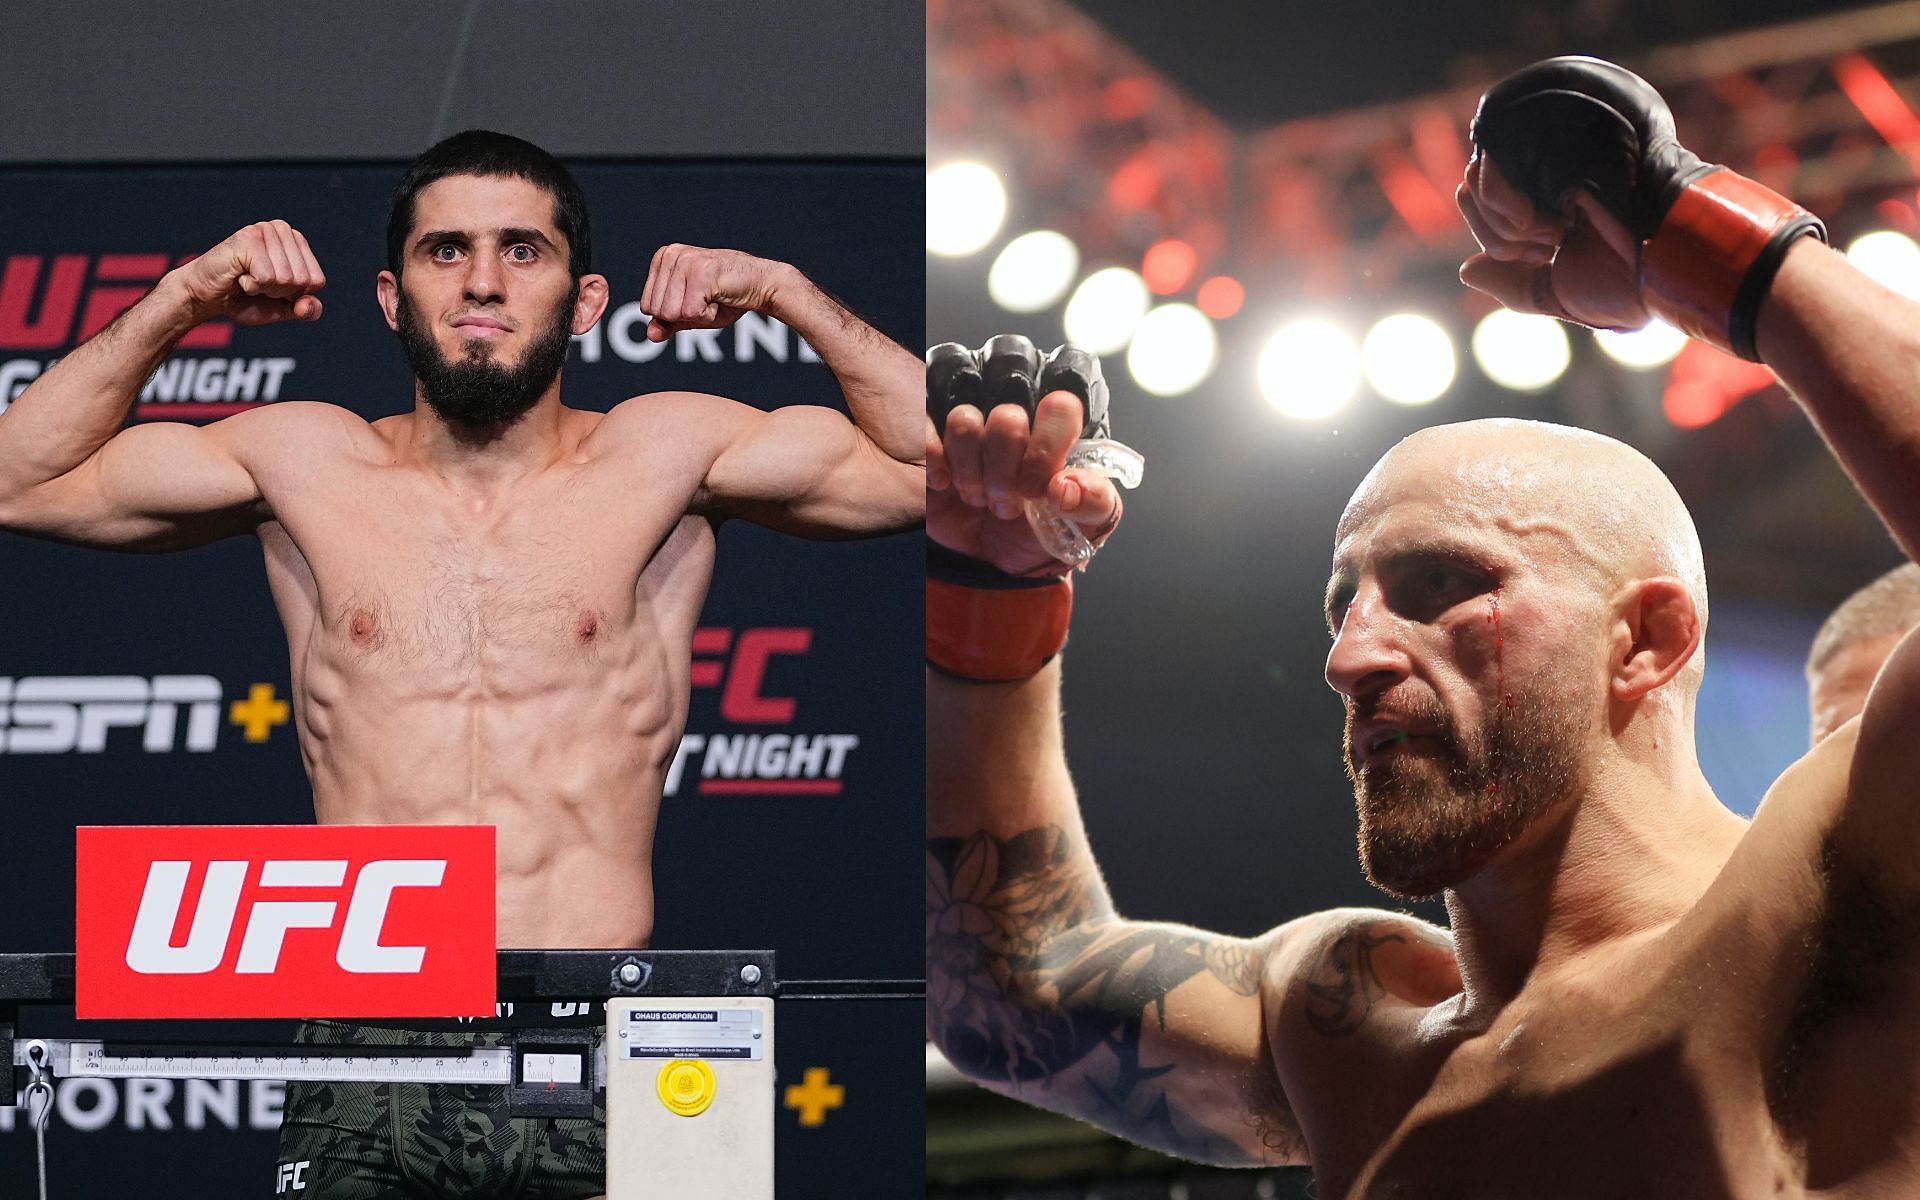 Islam Makhachev (left) and Alexander Volkanovski (right) [ Image Courtesy: Getty Images]